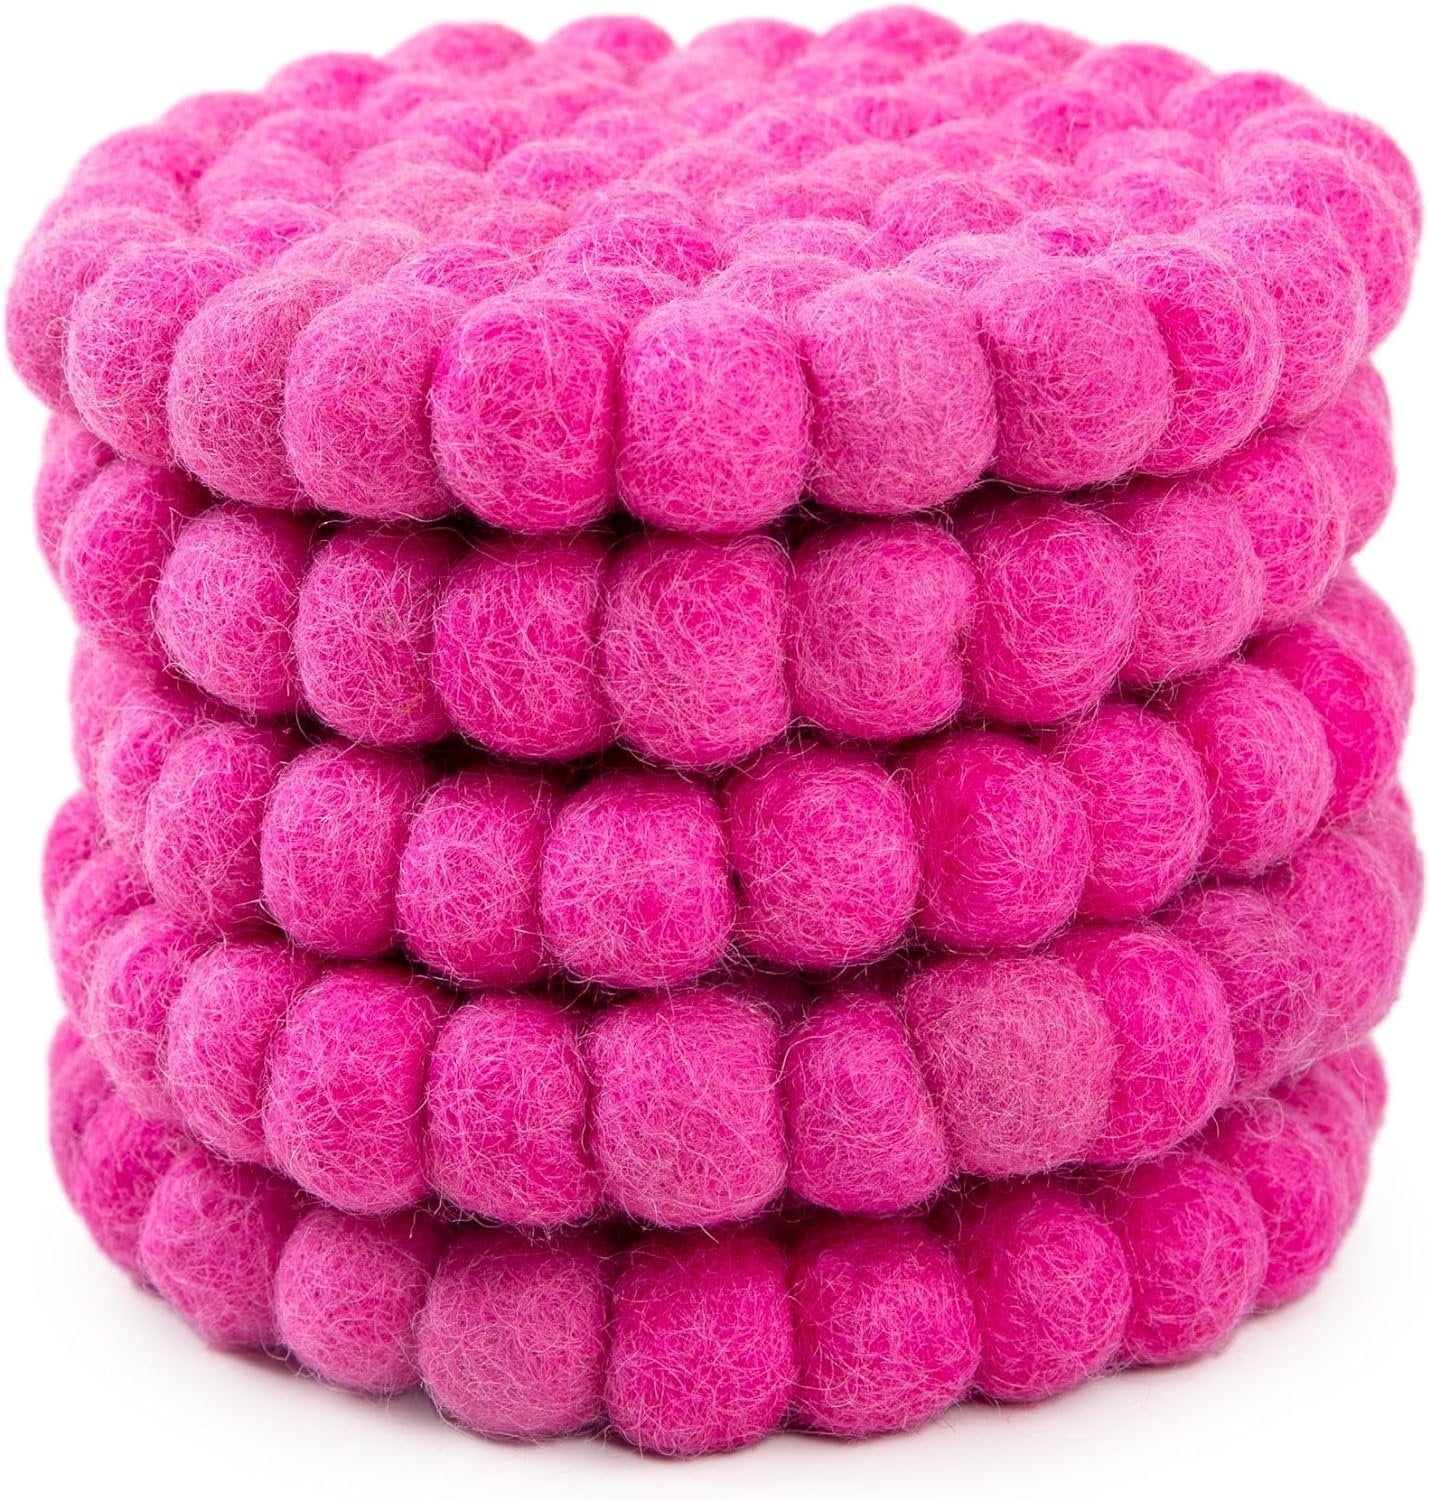 Round Felt Ball Coasters - 100% Merino Wool Table Coasters - Felt Coaster Pads, Absorbent Trivet for Drinks - Heat Resistant, Thick & Durable Hand Felted in Nepal by Woolygon- Multicolor - Set of 5